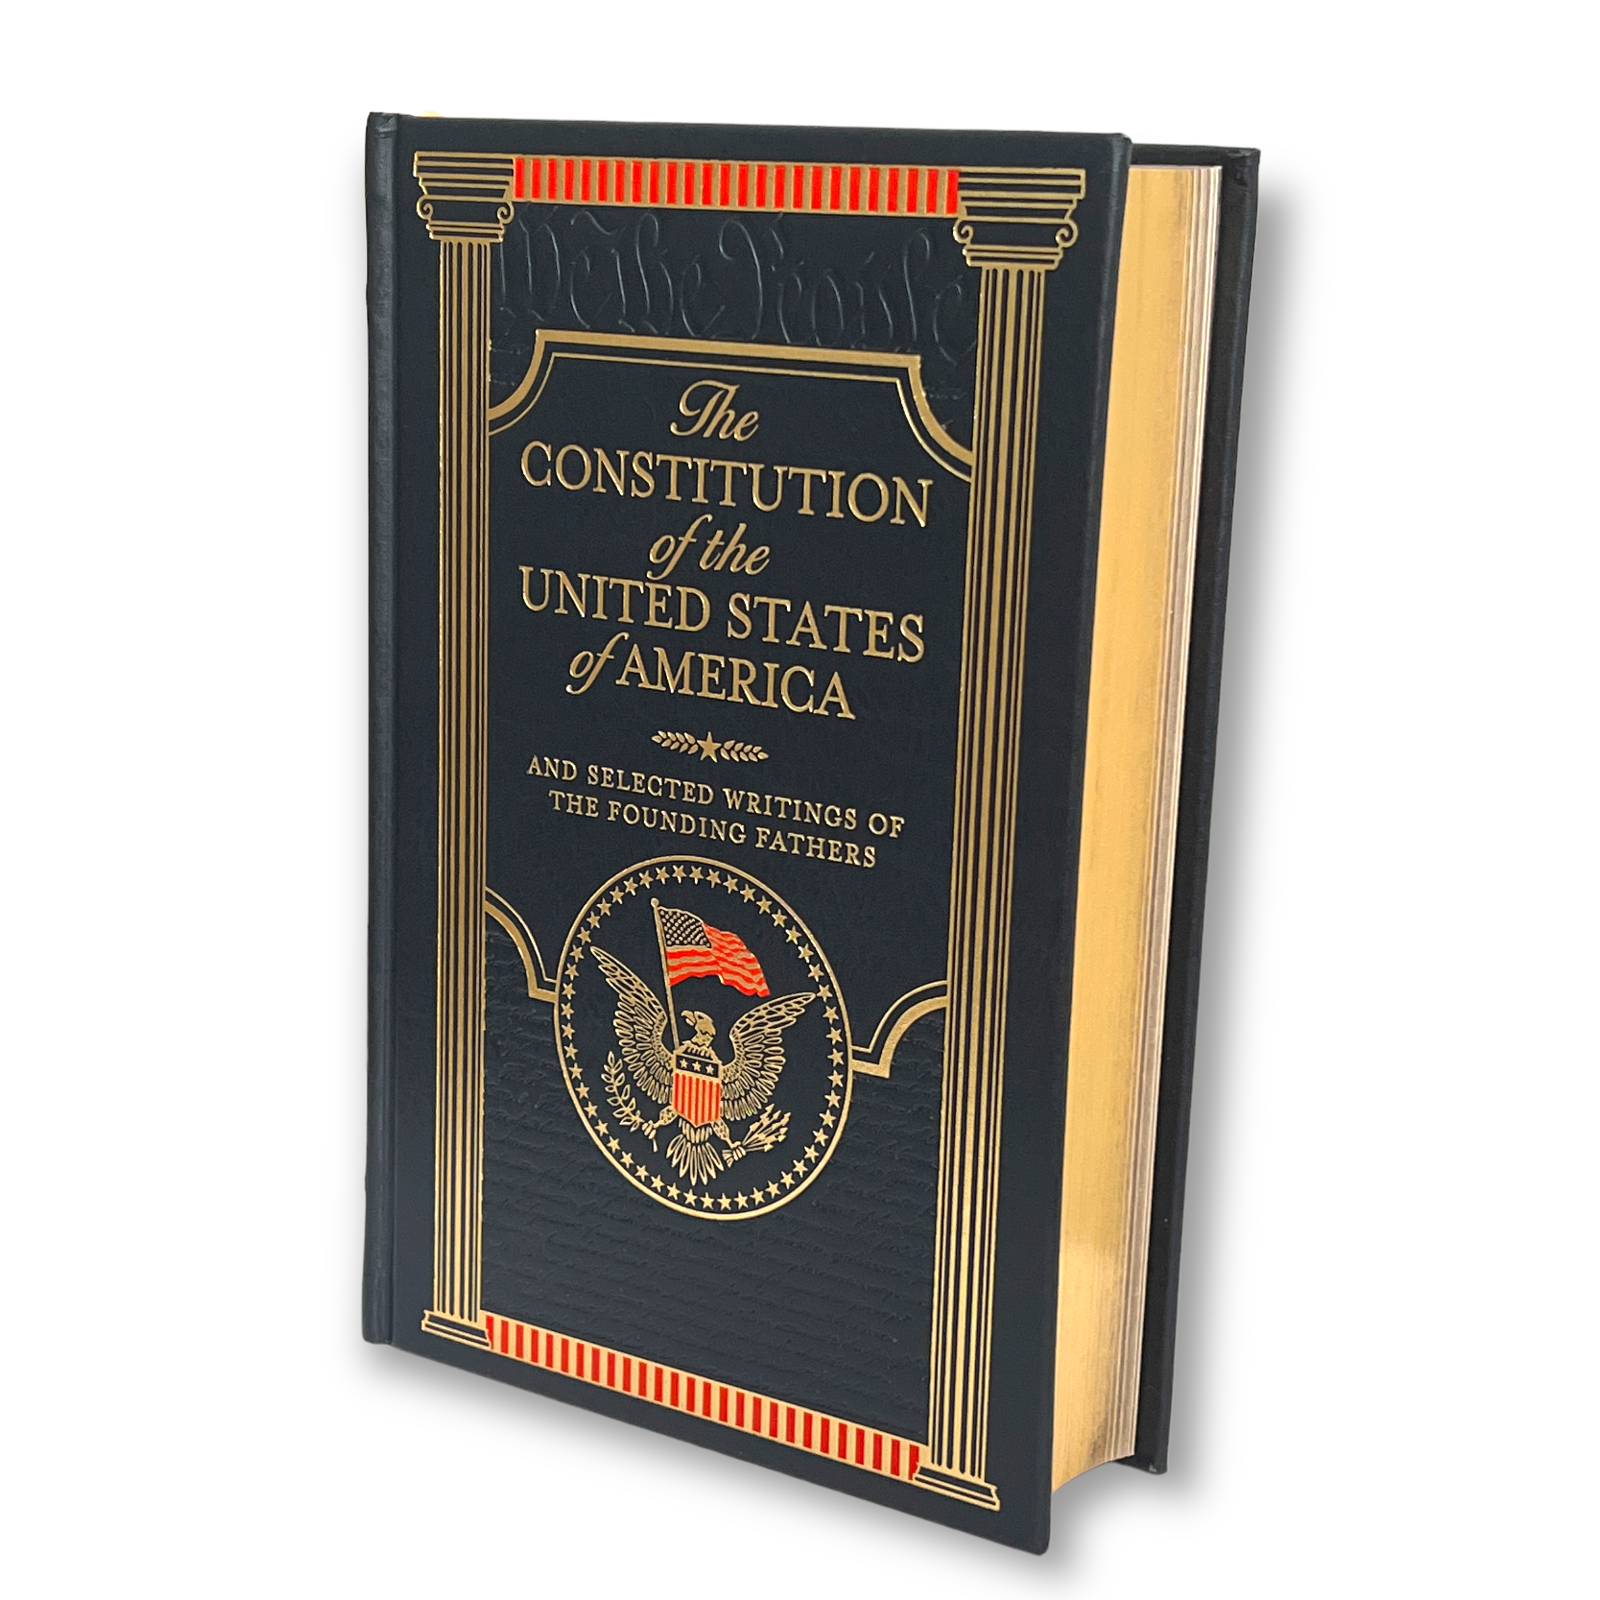 The Constitution of The United States of America